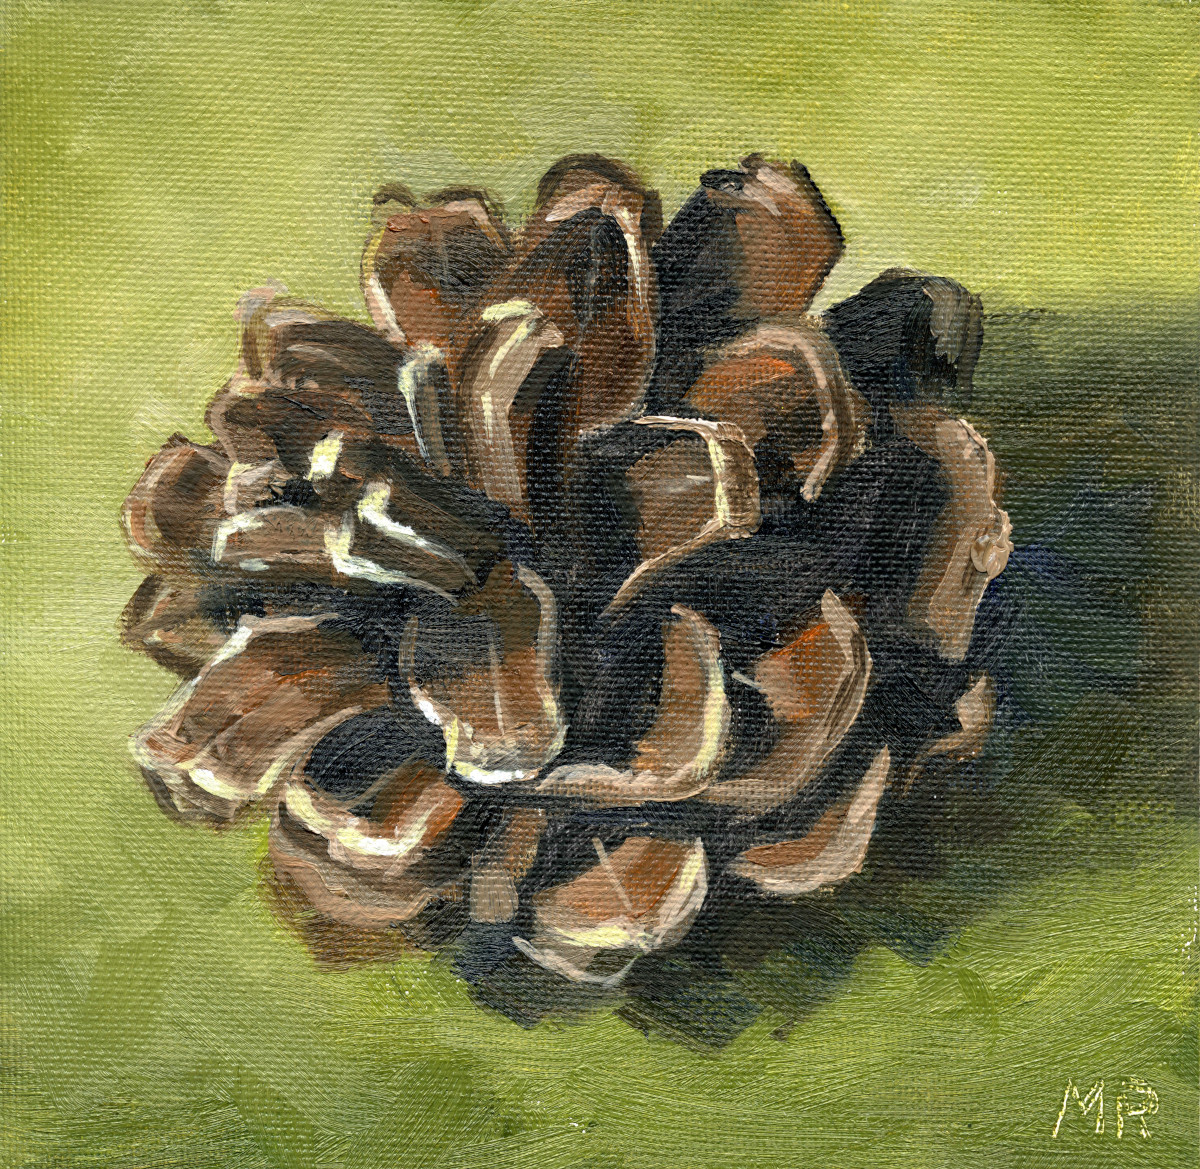 Small Pinecone (County Collector)
